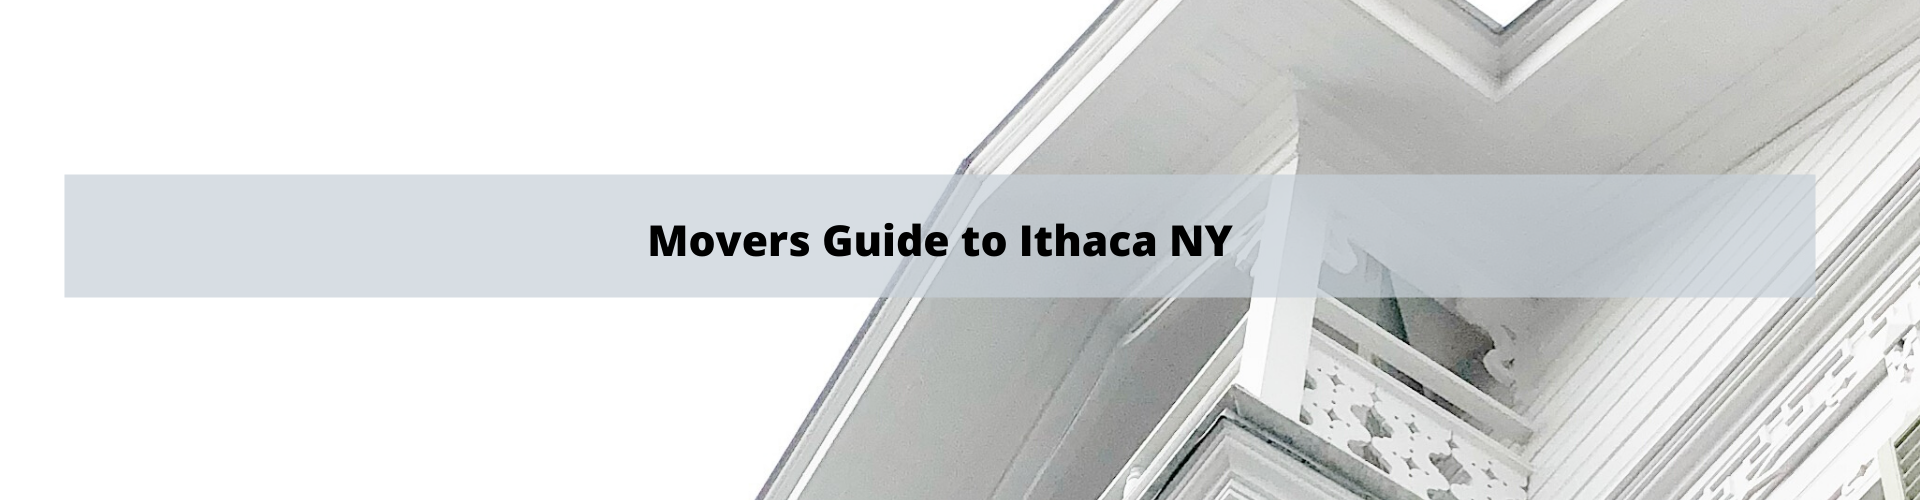 Mover's Guide to Ithaca NY